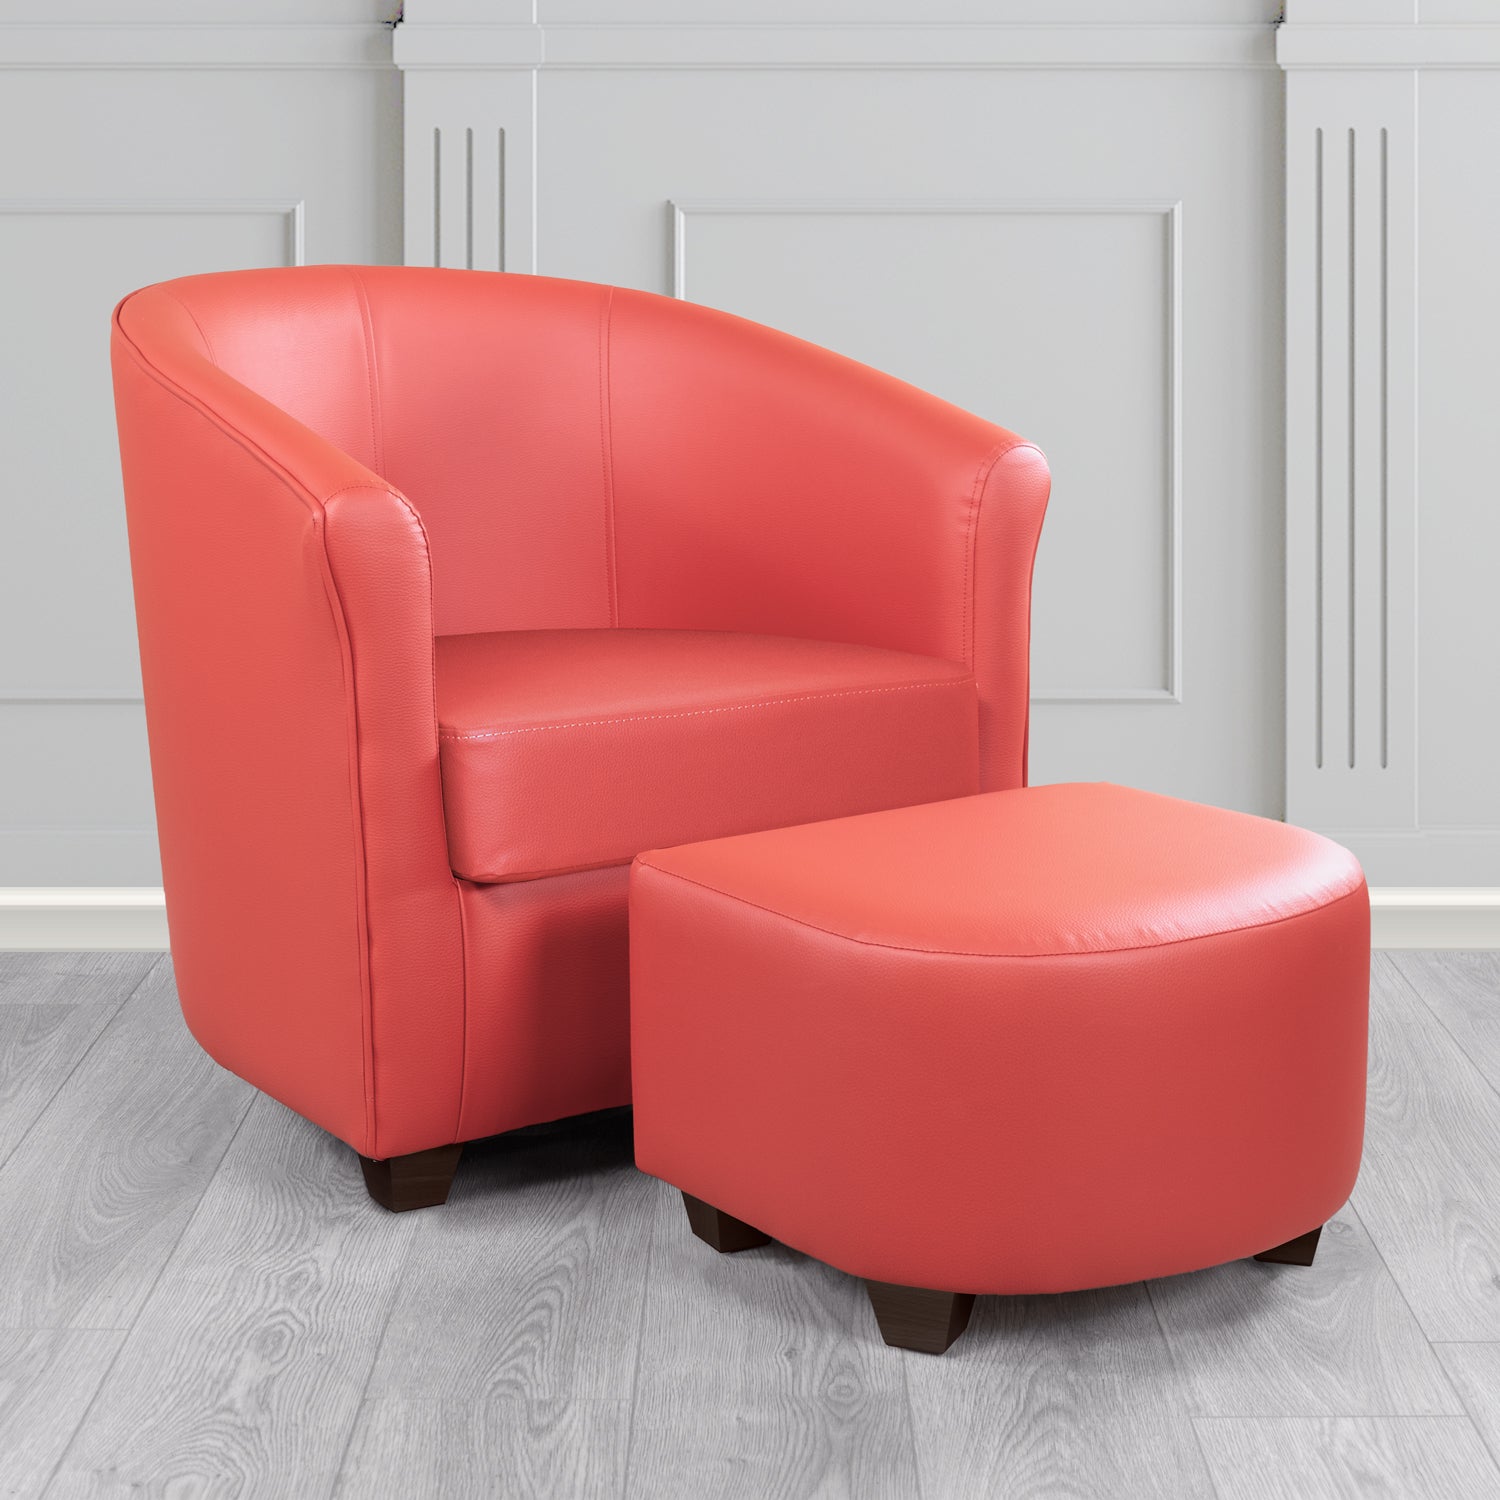 Cannes Tub Chair with Footstool Set in Just Colour Coral Crib 5 Faux Leather - The Tub Chair Shop